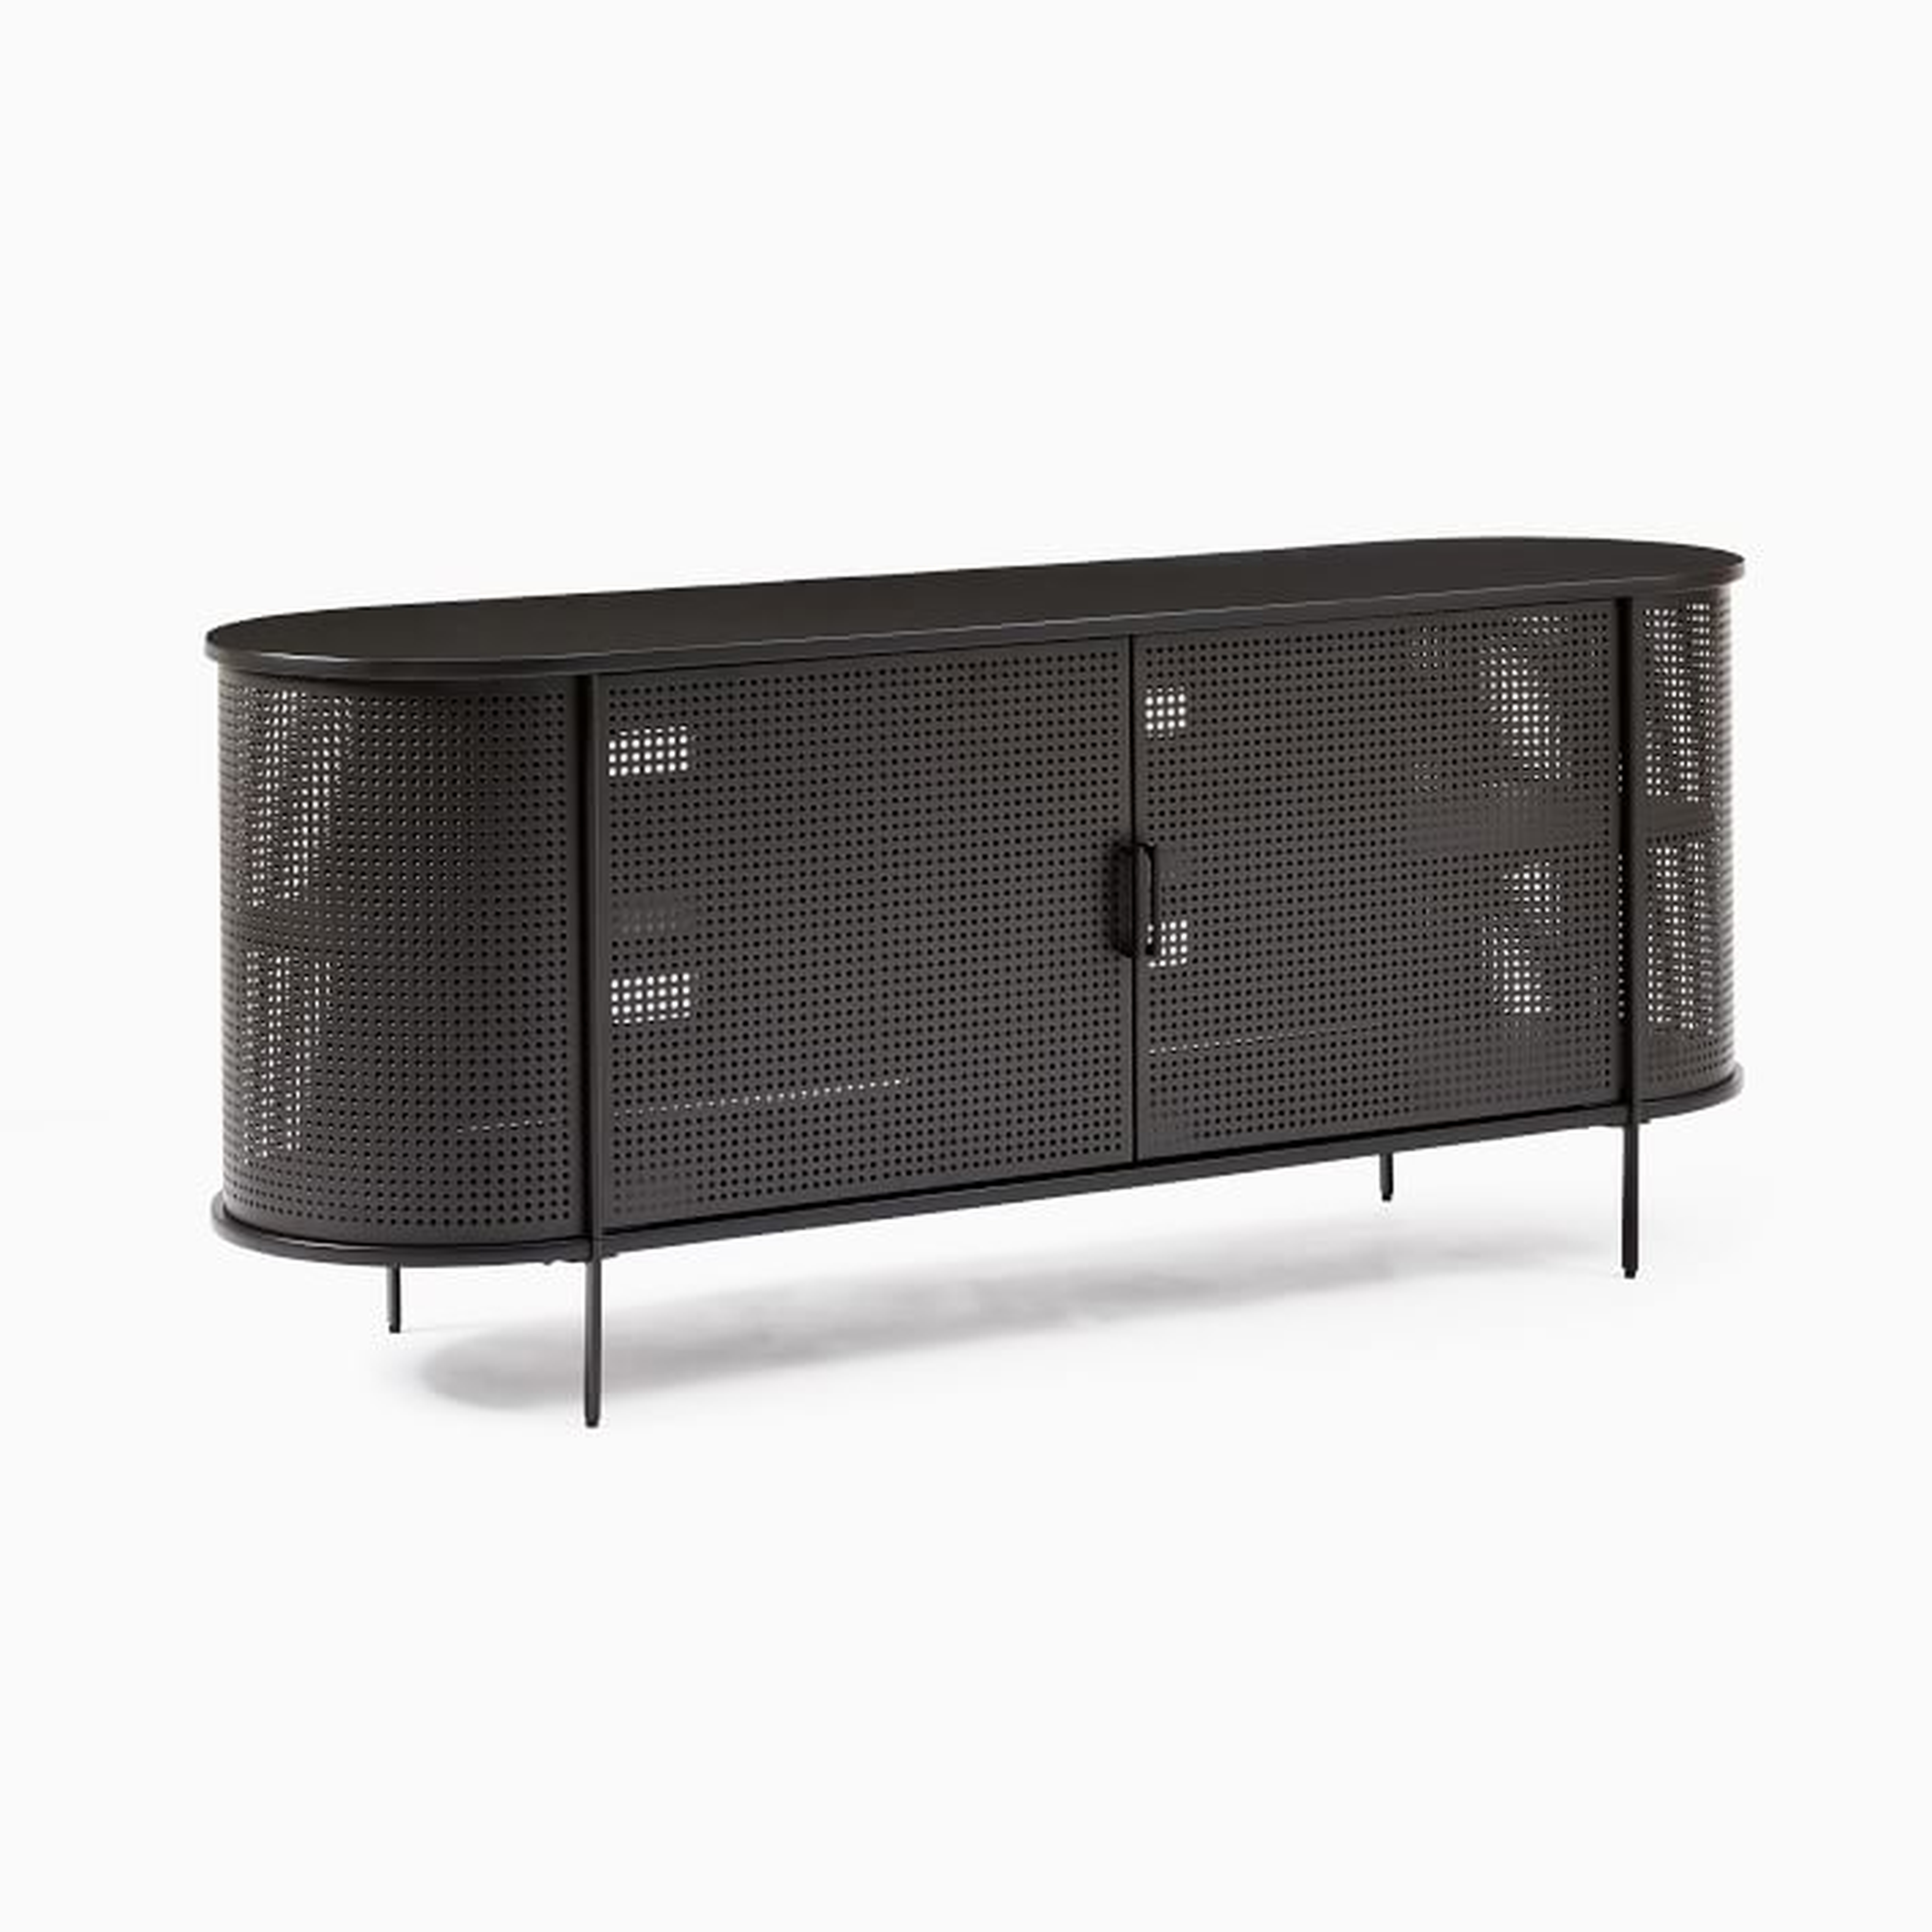 Perforated Metal Buffet - West Elm